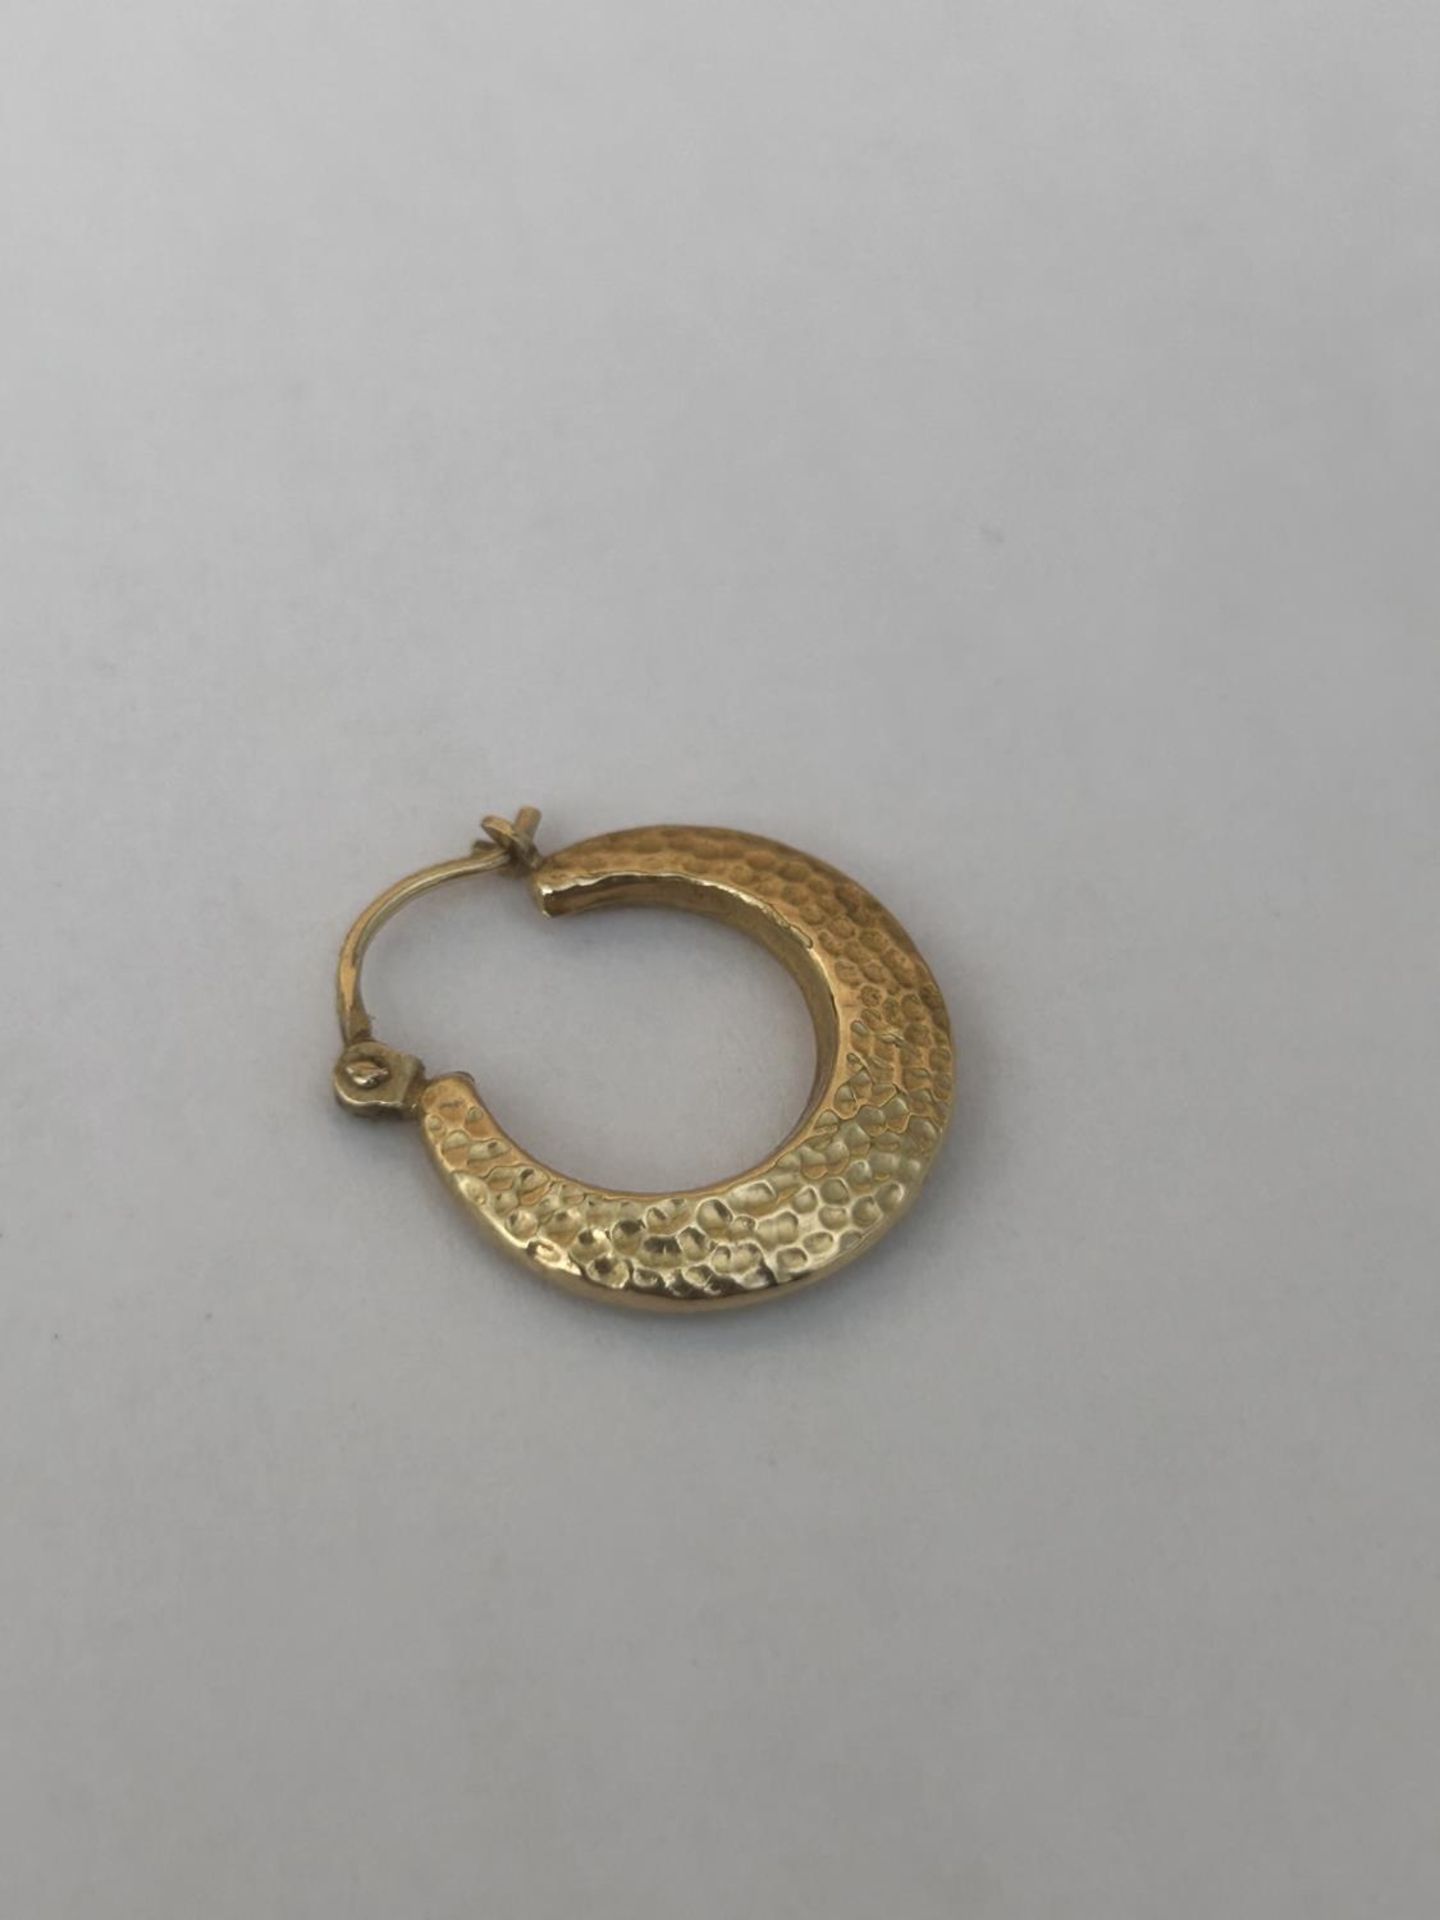 A PAIR OF 9CT GOLD HALF MOON EARRINGS, WEIGHT 1.5 G - Image 2 of 3